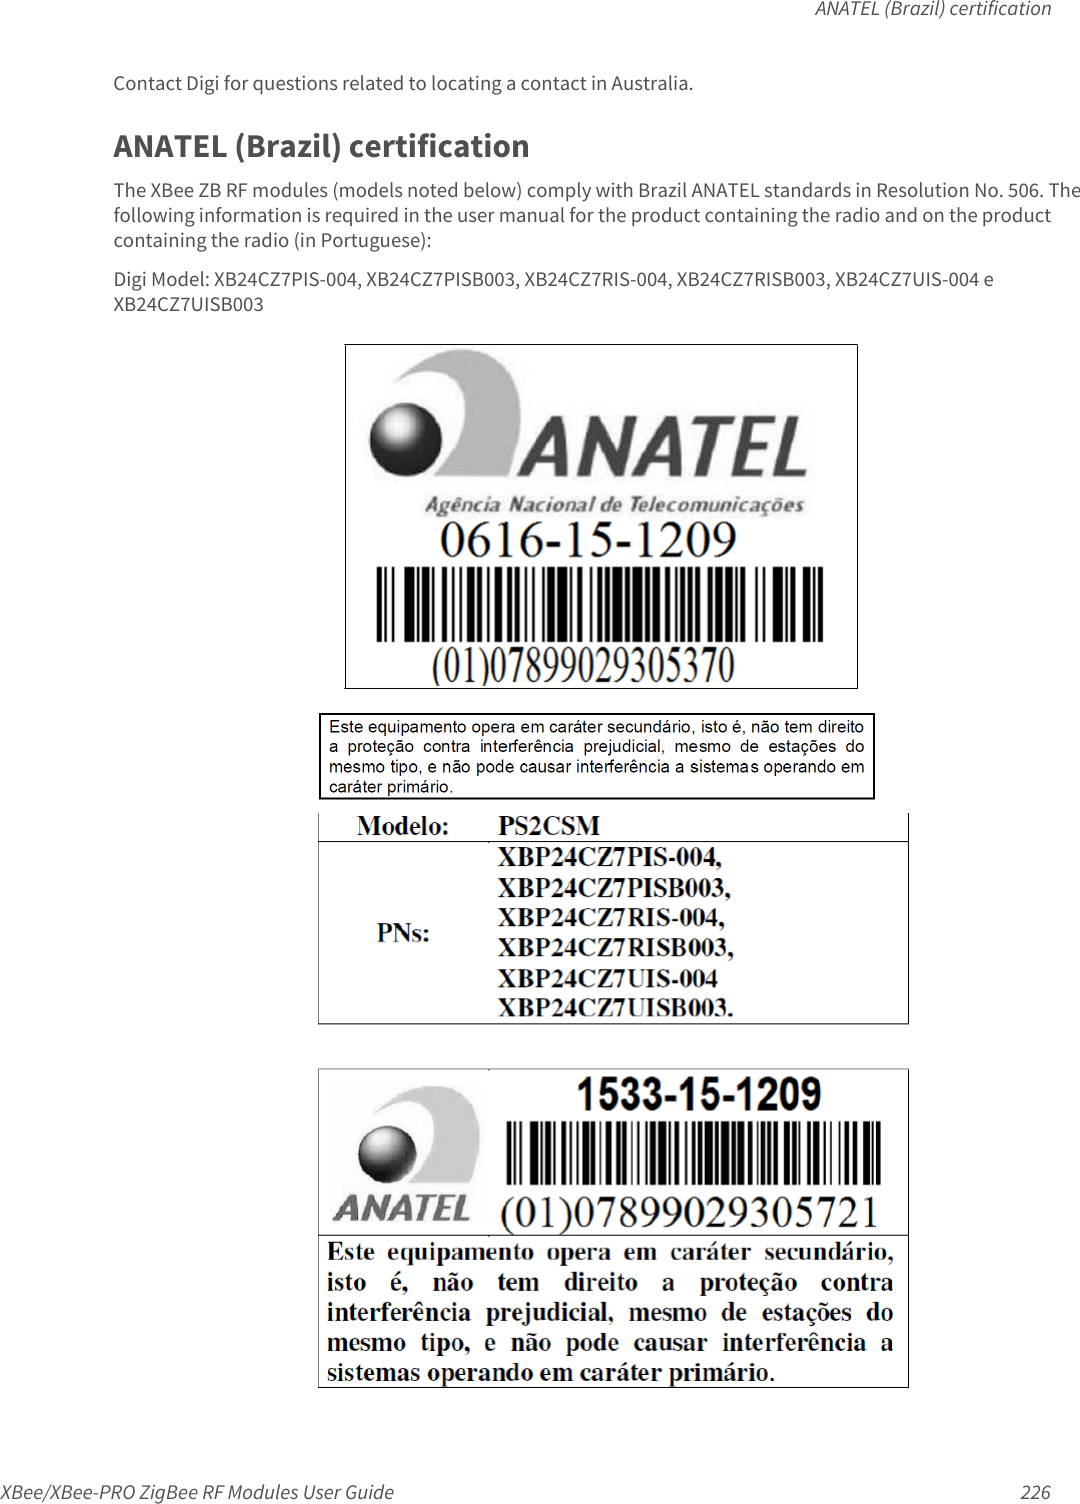 ANATEL (Brazil) certificationXBee/XBee-PRO ZigBee RF Modules User Guide 226Contact Digi for questions related to locating a contact in Australia.ANATEL (Brazil) certificationThe XBee ZB RF modules (models noted below) comply with Brazil ANATEL standards in Resolution No. 506. The following information is required in the user manual for the product containing the radio and on the product containing the radio (in Portuguese):Digi Model: XB24CZ7PIS-004, XB24CZ7PISB003, XB24CZ7RIS-004, XB24CZ7RISB003, XB24CZ7UIS-004 e XB24CZ7UISB003